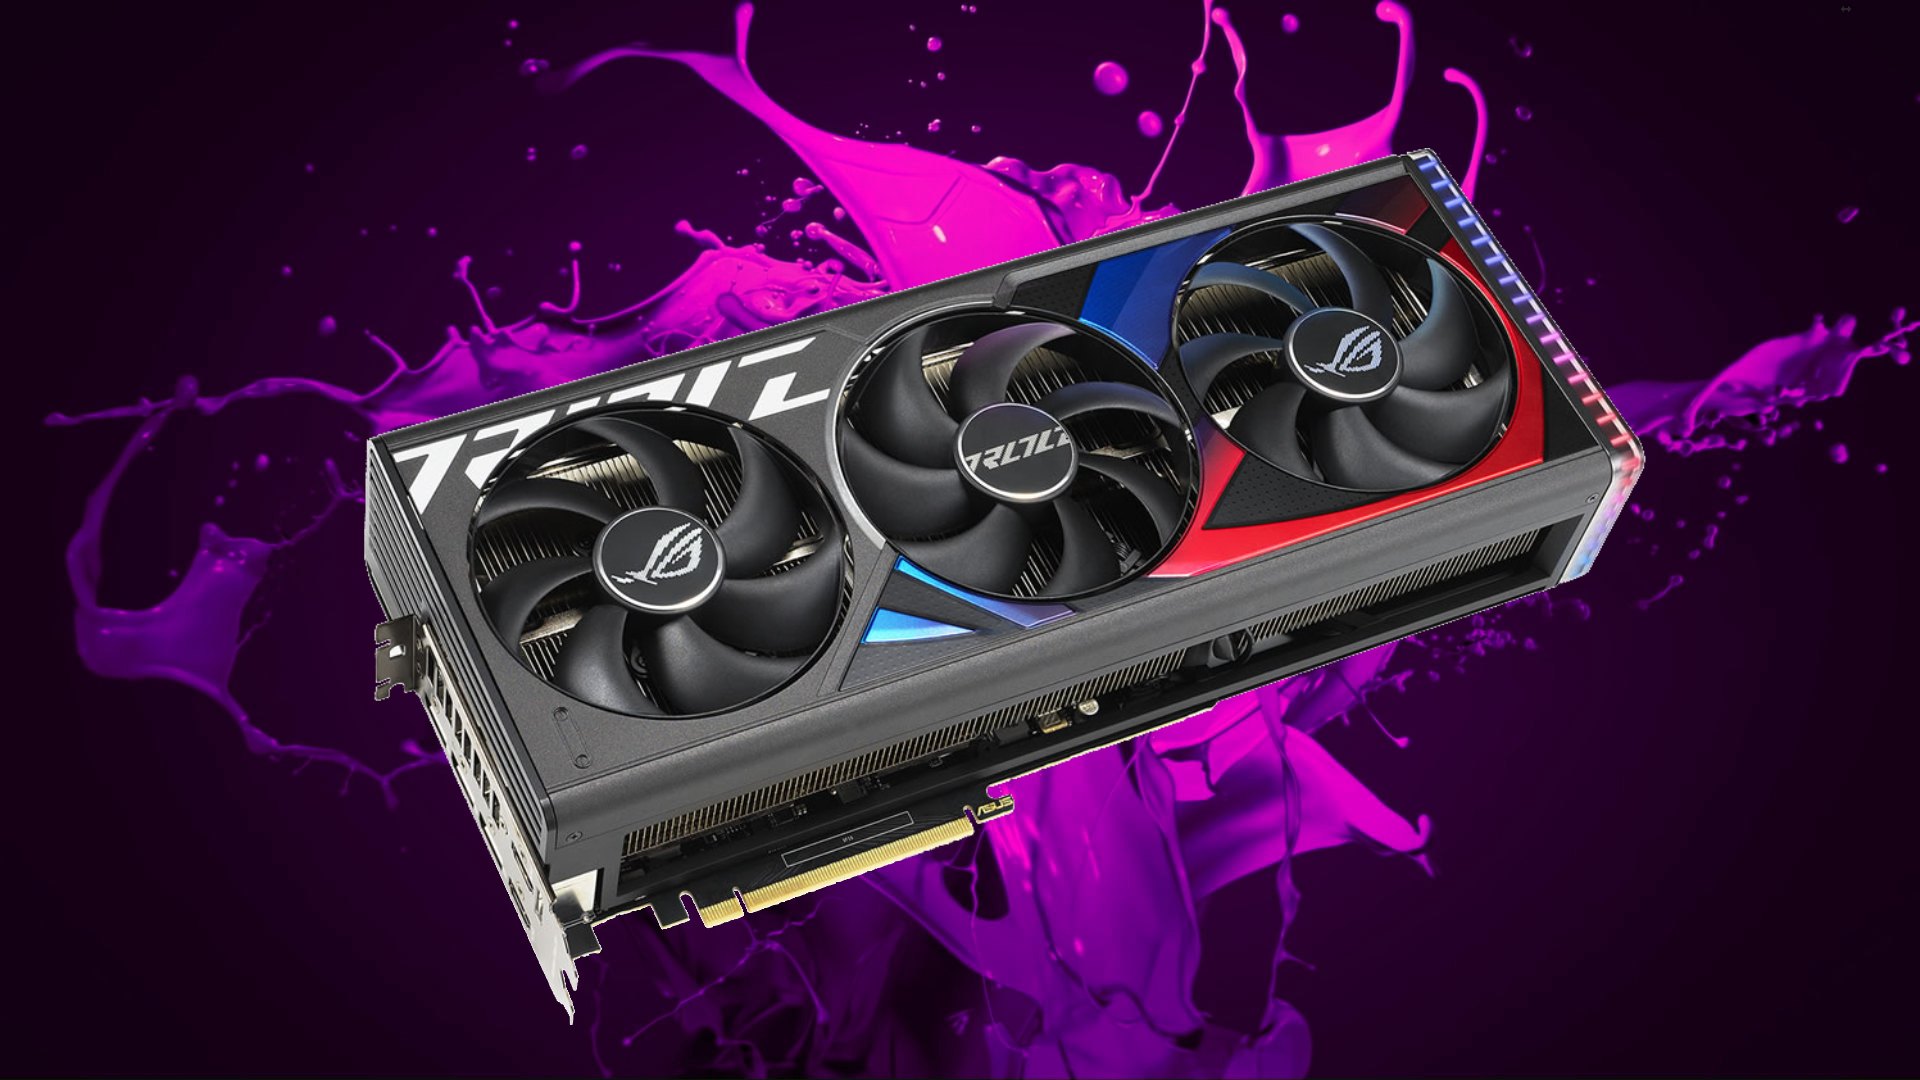 Asus could be brewing AMD Radeon RX 7900 GPUs with a Strix twist